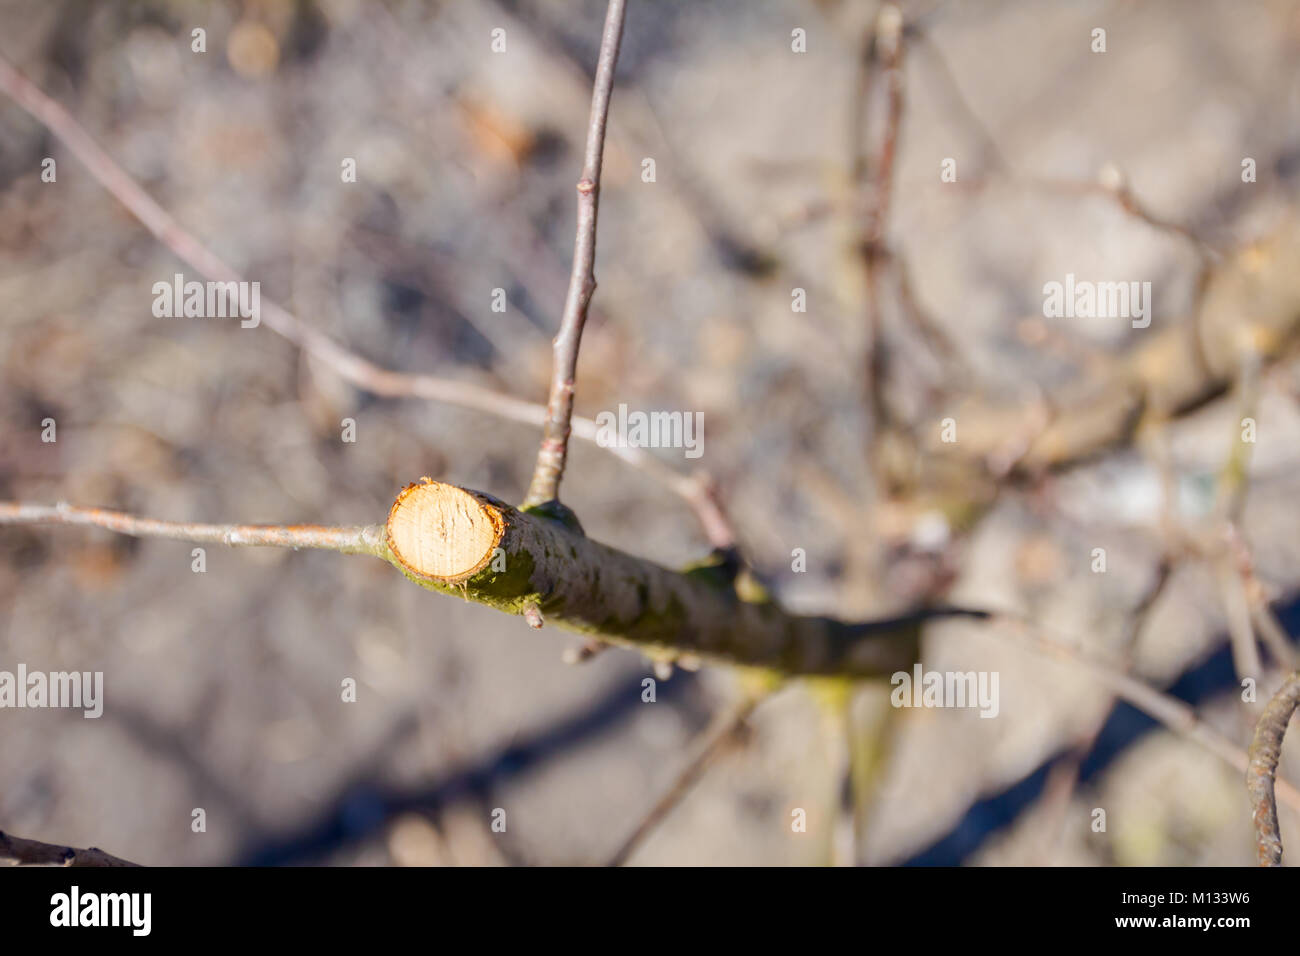 Farmer has pruned branches of trees in orchard using loppers at early spring. Stock Photo